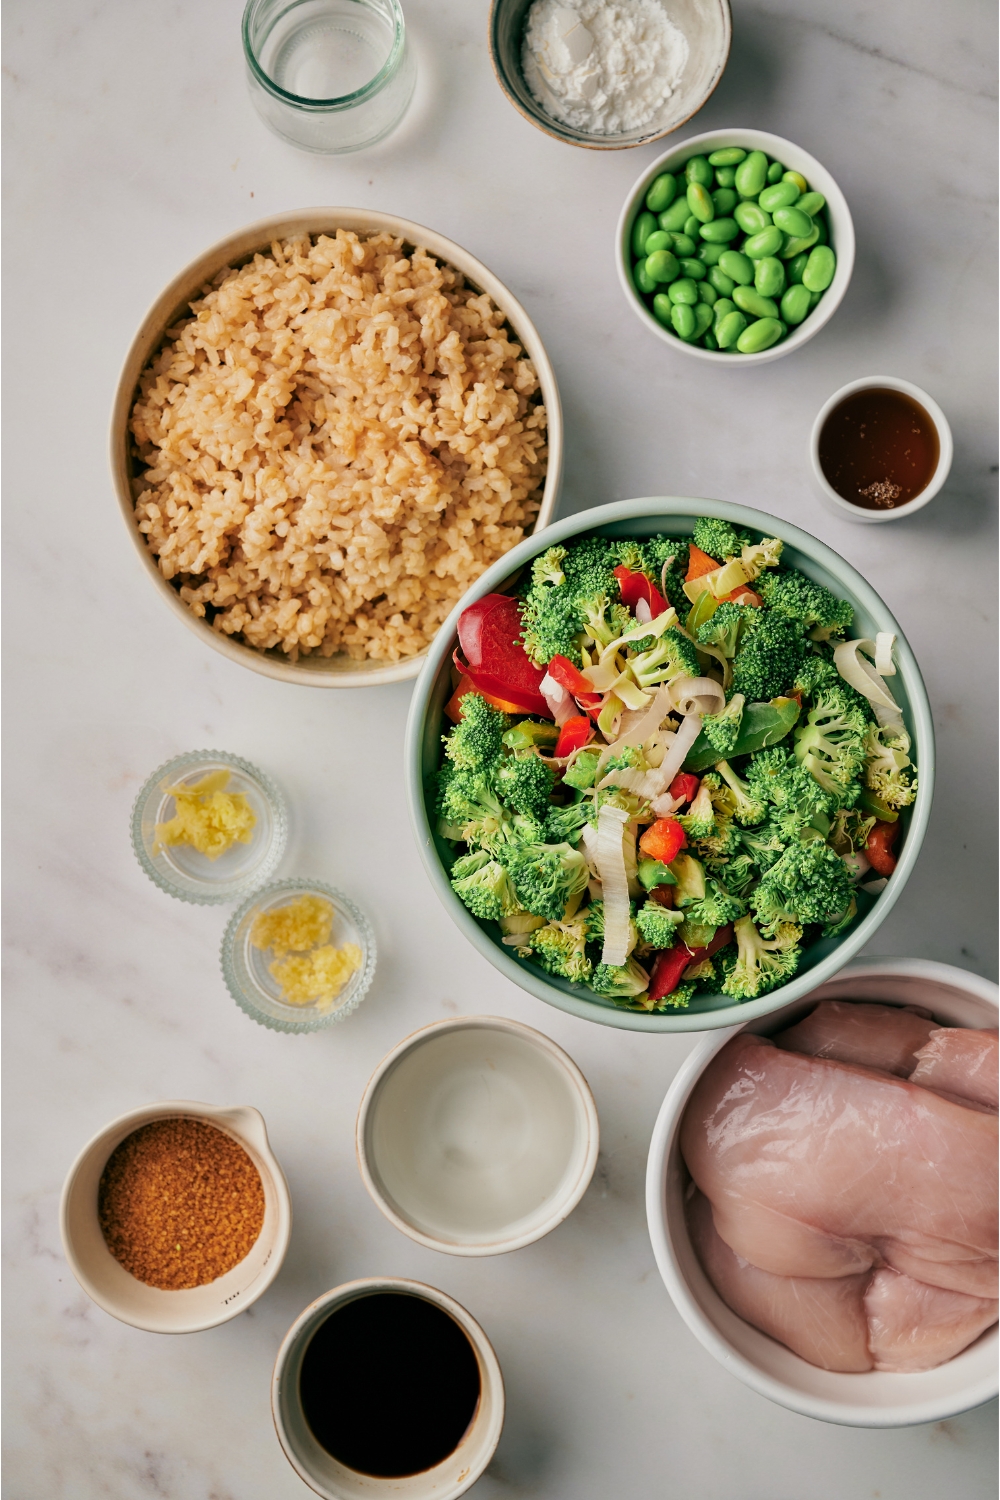 An assortment of ingredients including bowls of raw vegetables, cooked brown rice, edamame, minced garlic, minced ginger, brown sugar, soy sauce, and raw chicken breasts.